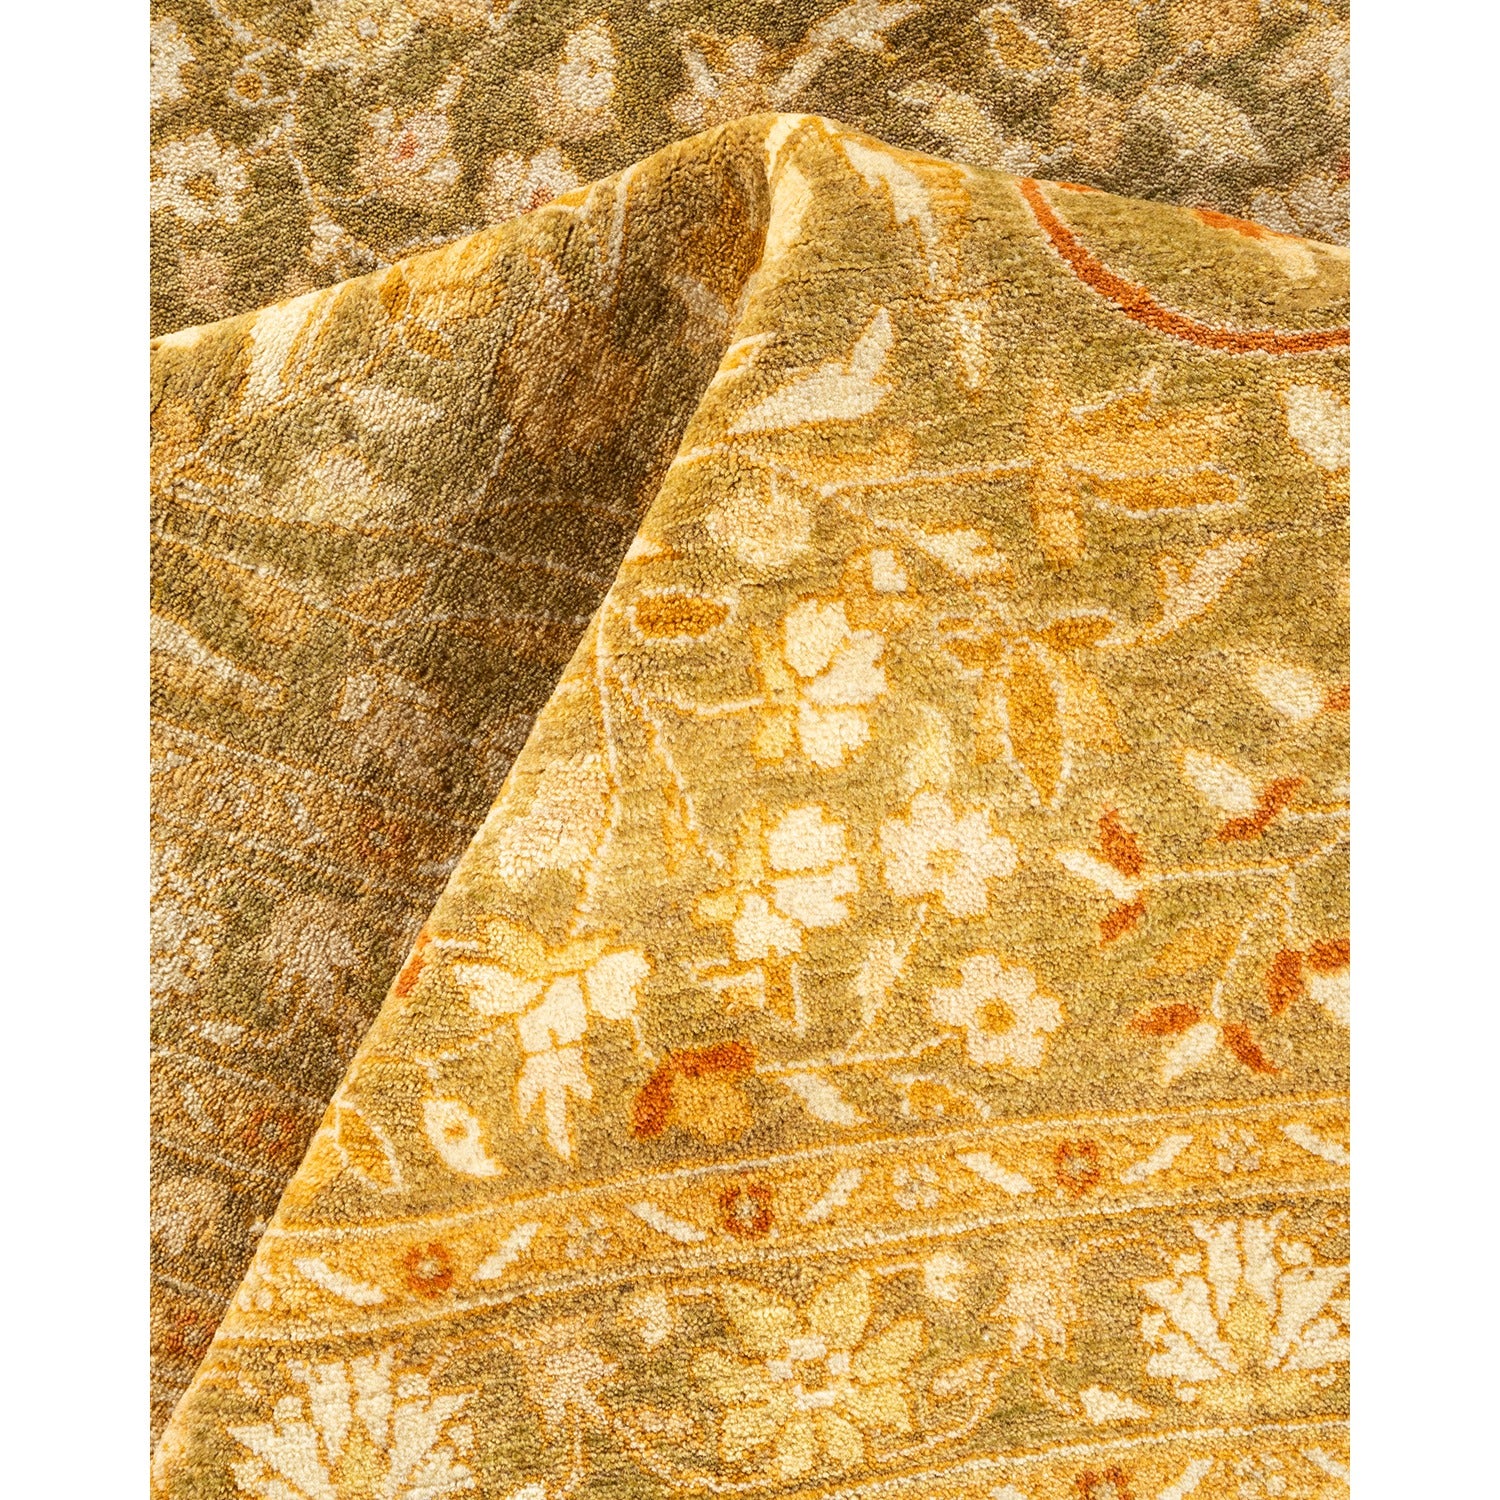 Close-up of intricately patterned fabric in shades of gold and brown.